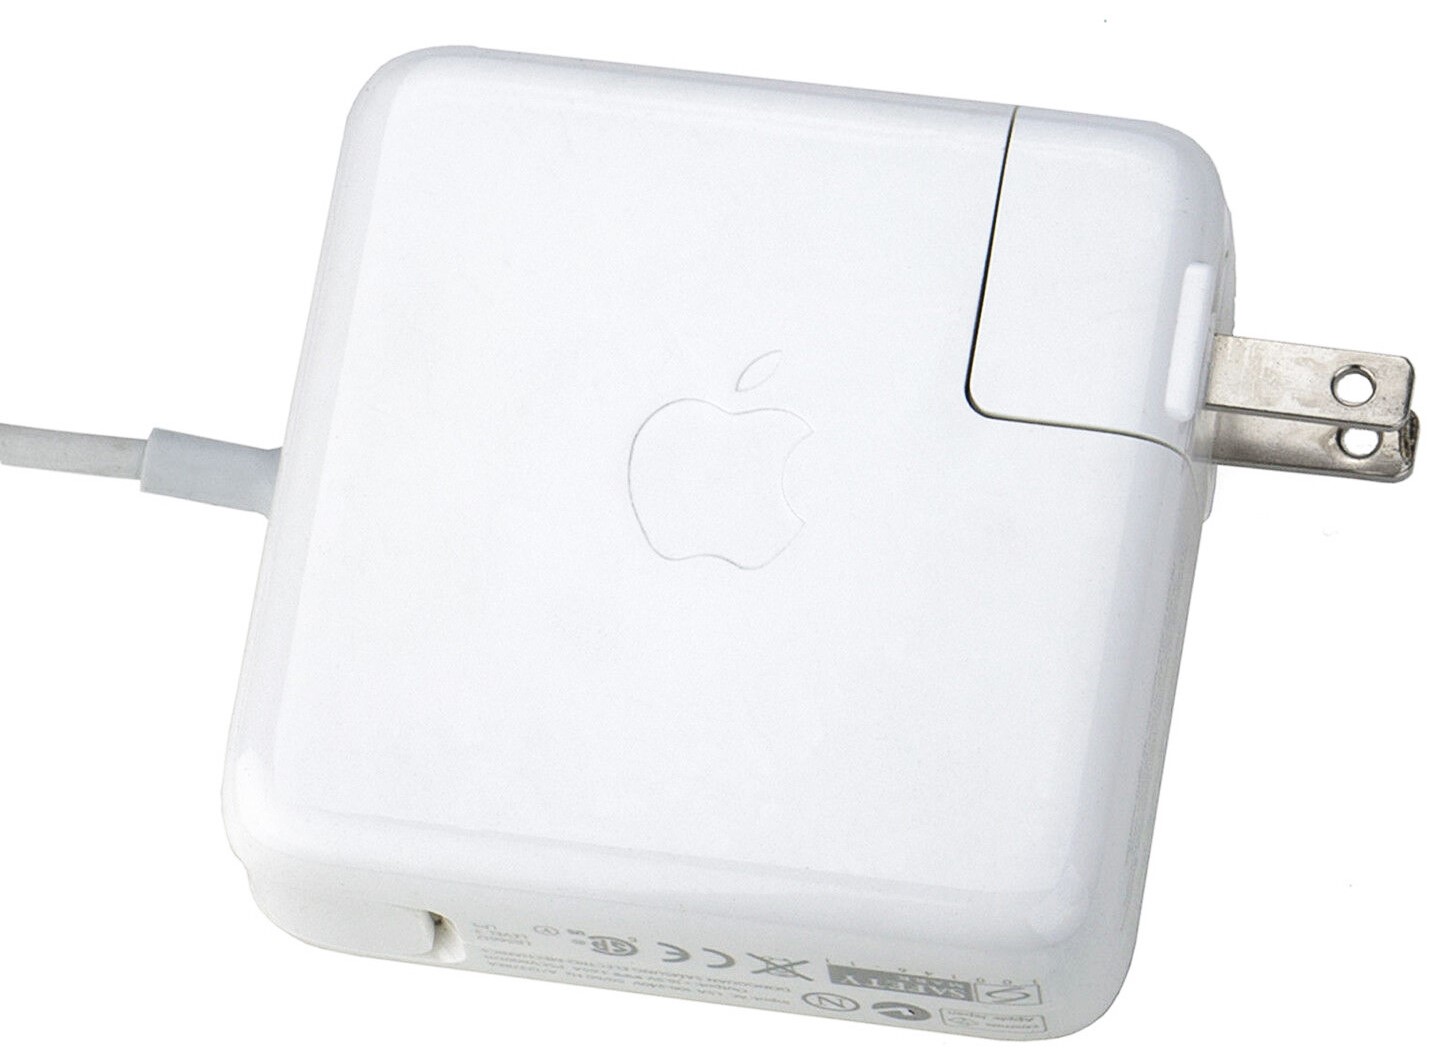 Apple MacBook Charger 85W MagSafe 1 Power Adapter - A1343 (MA938LL/A)